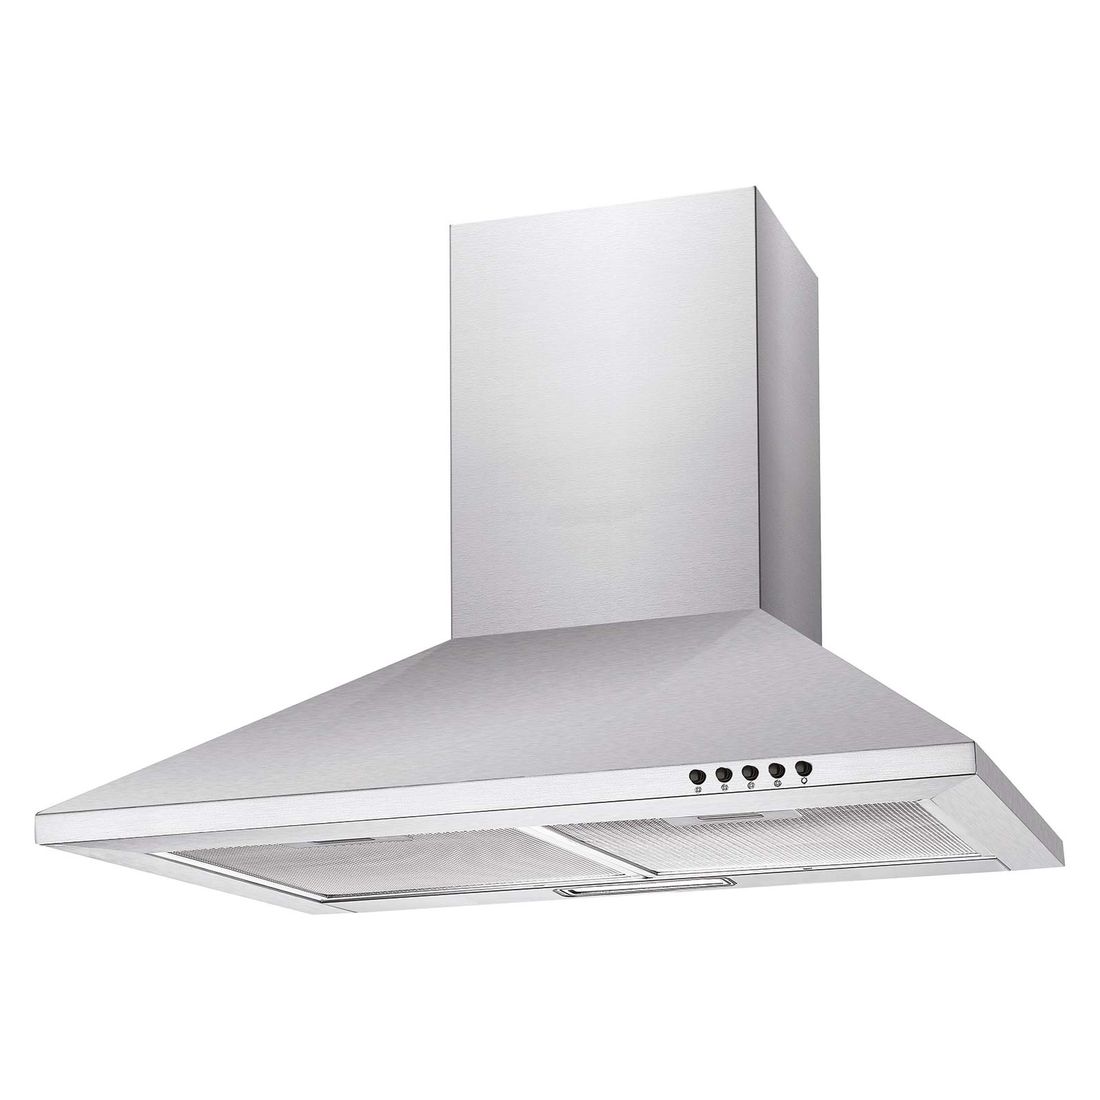 Candy 60Cm Chimney Cooker Hood Extractor S/Steel Cce60Nx/S